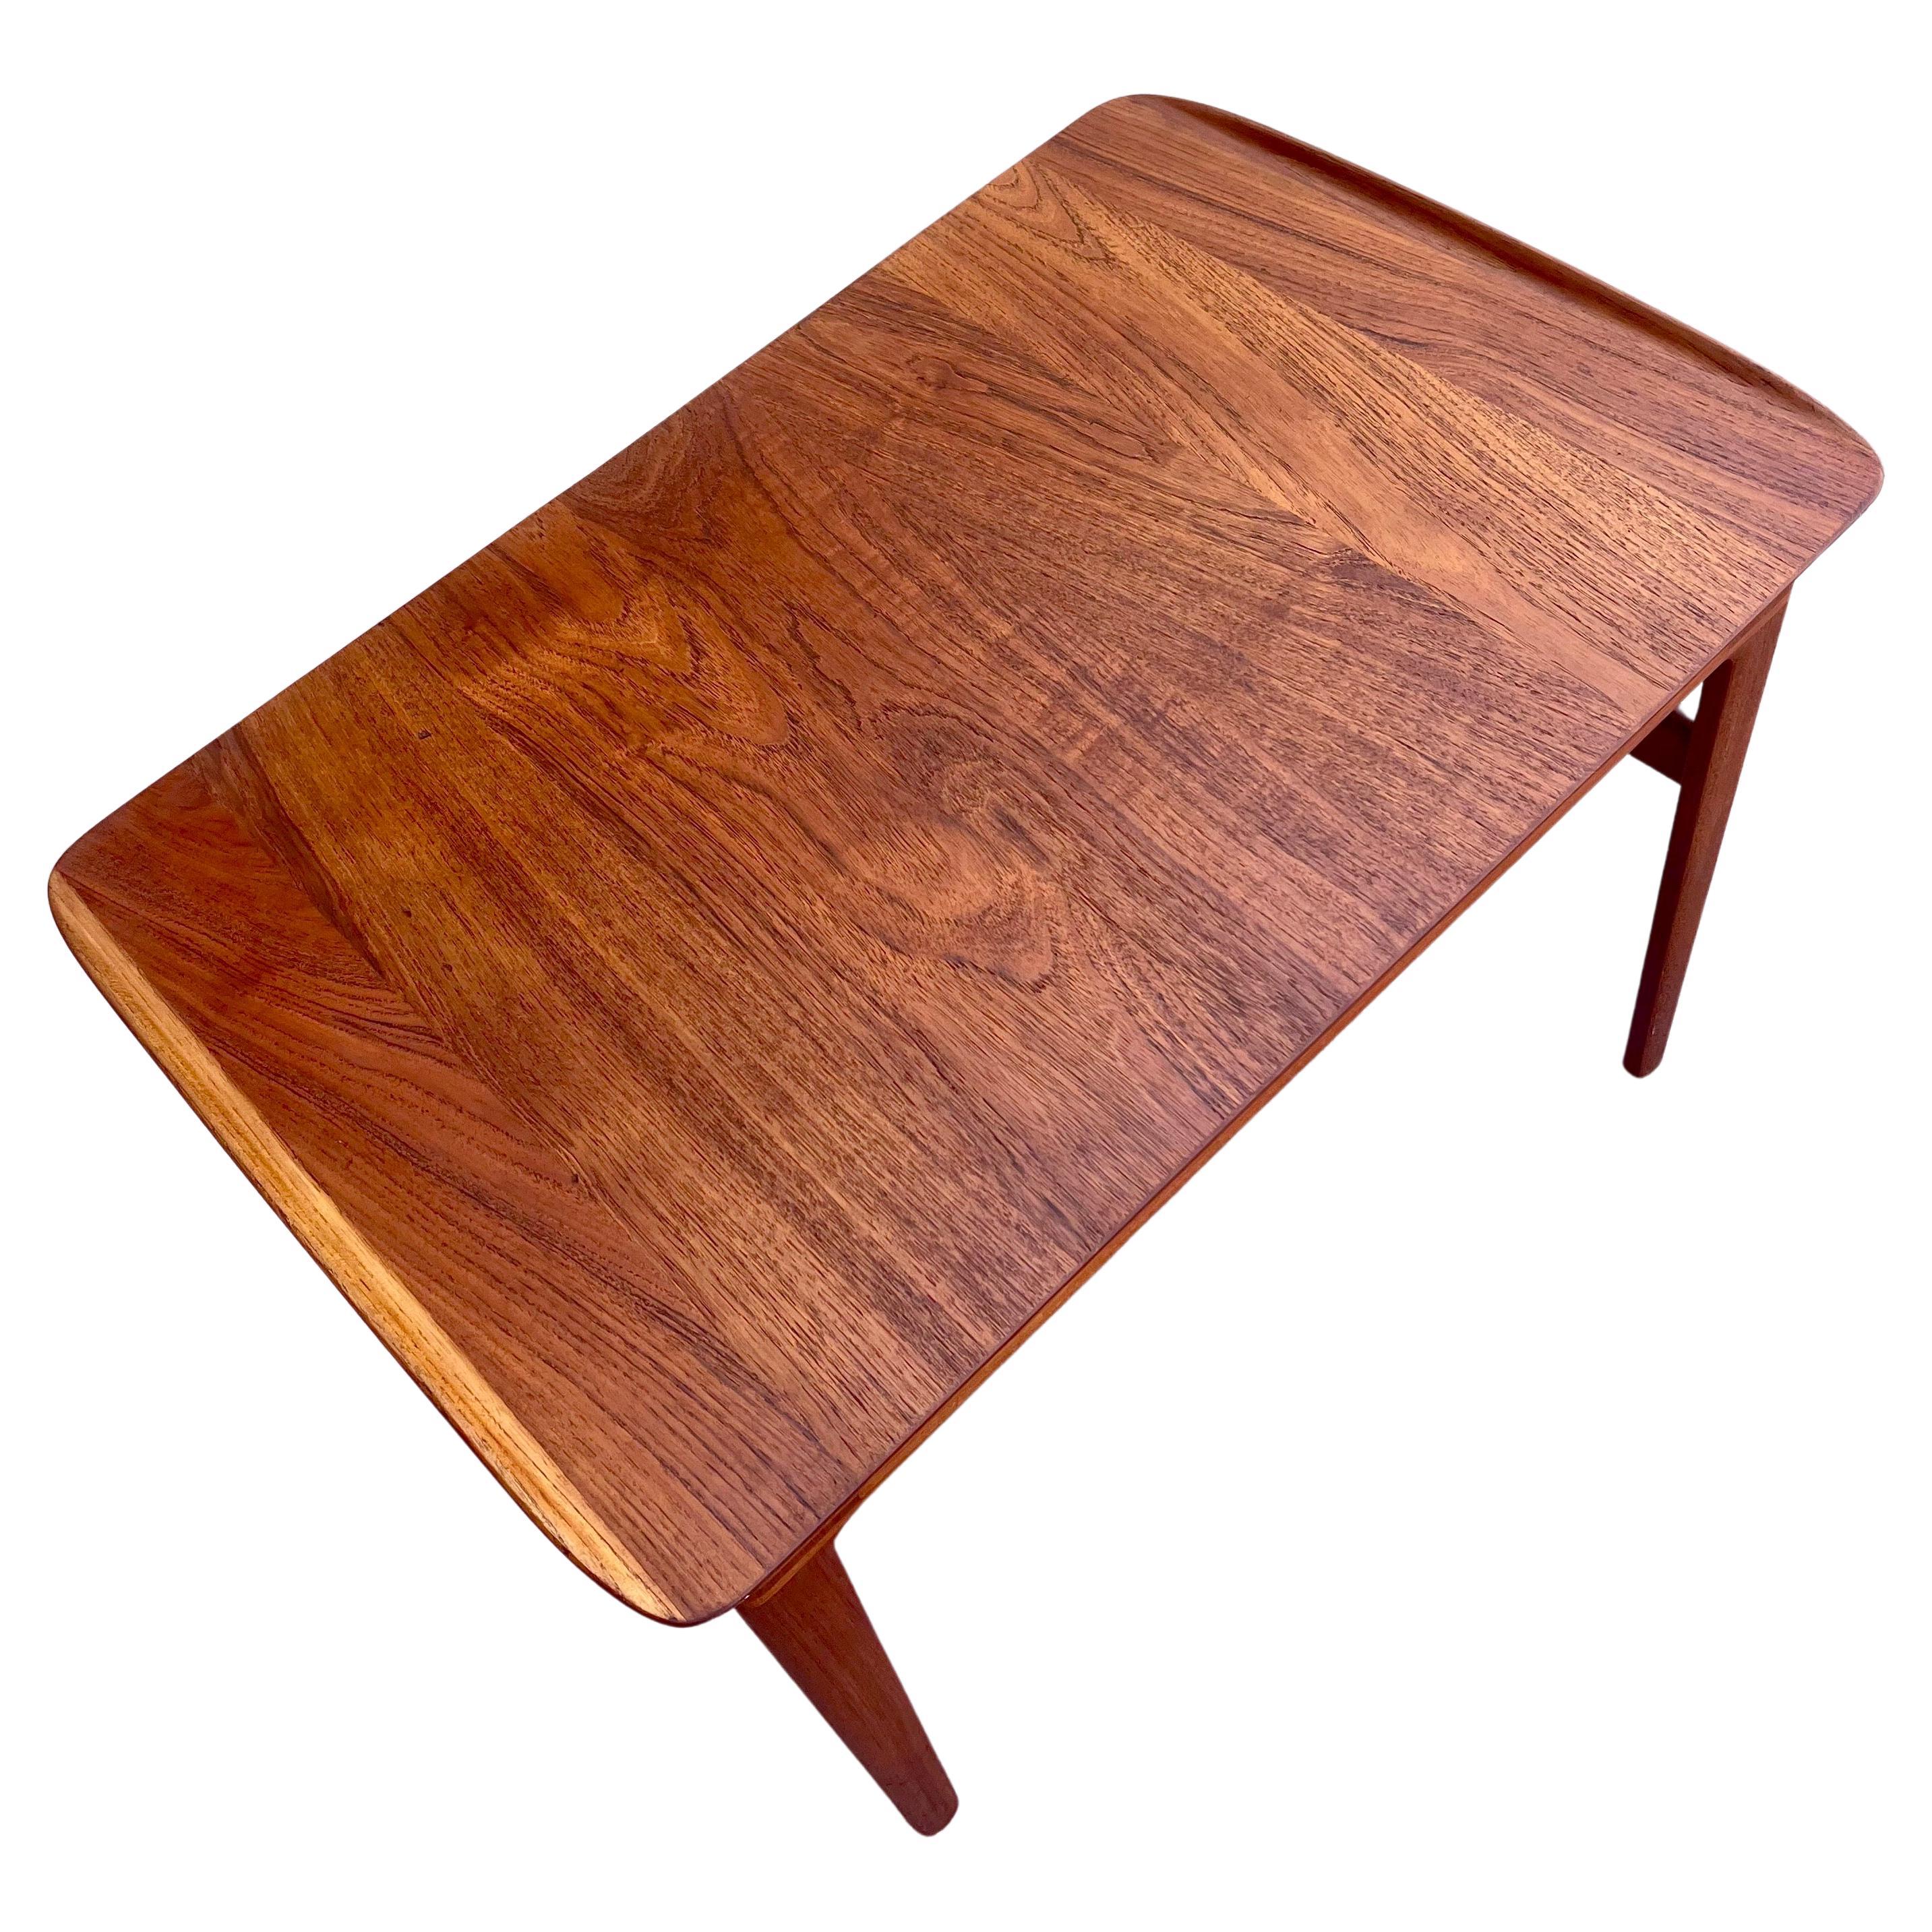 Beautiful rare solid teak end cocktail table designed by Peter Hvidt, imported by Jhon Stuart, and manufactured by France and Sons, circa 1950s, solid teak with drawer and raised ends edge. incredible craftsmanship, we have it refinished and oiled.